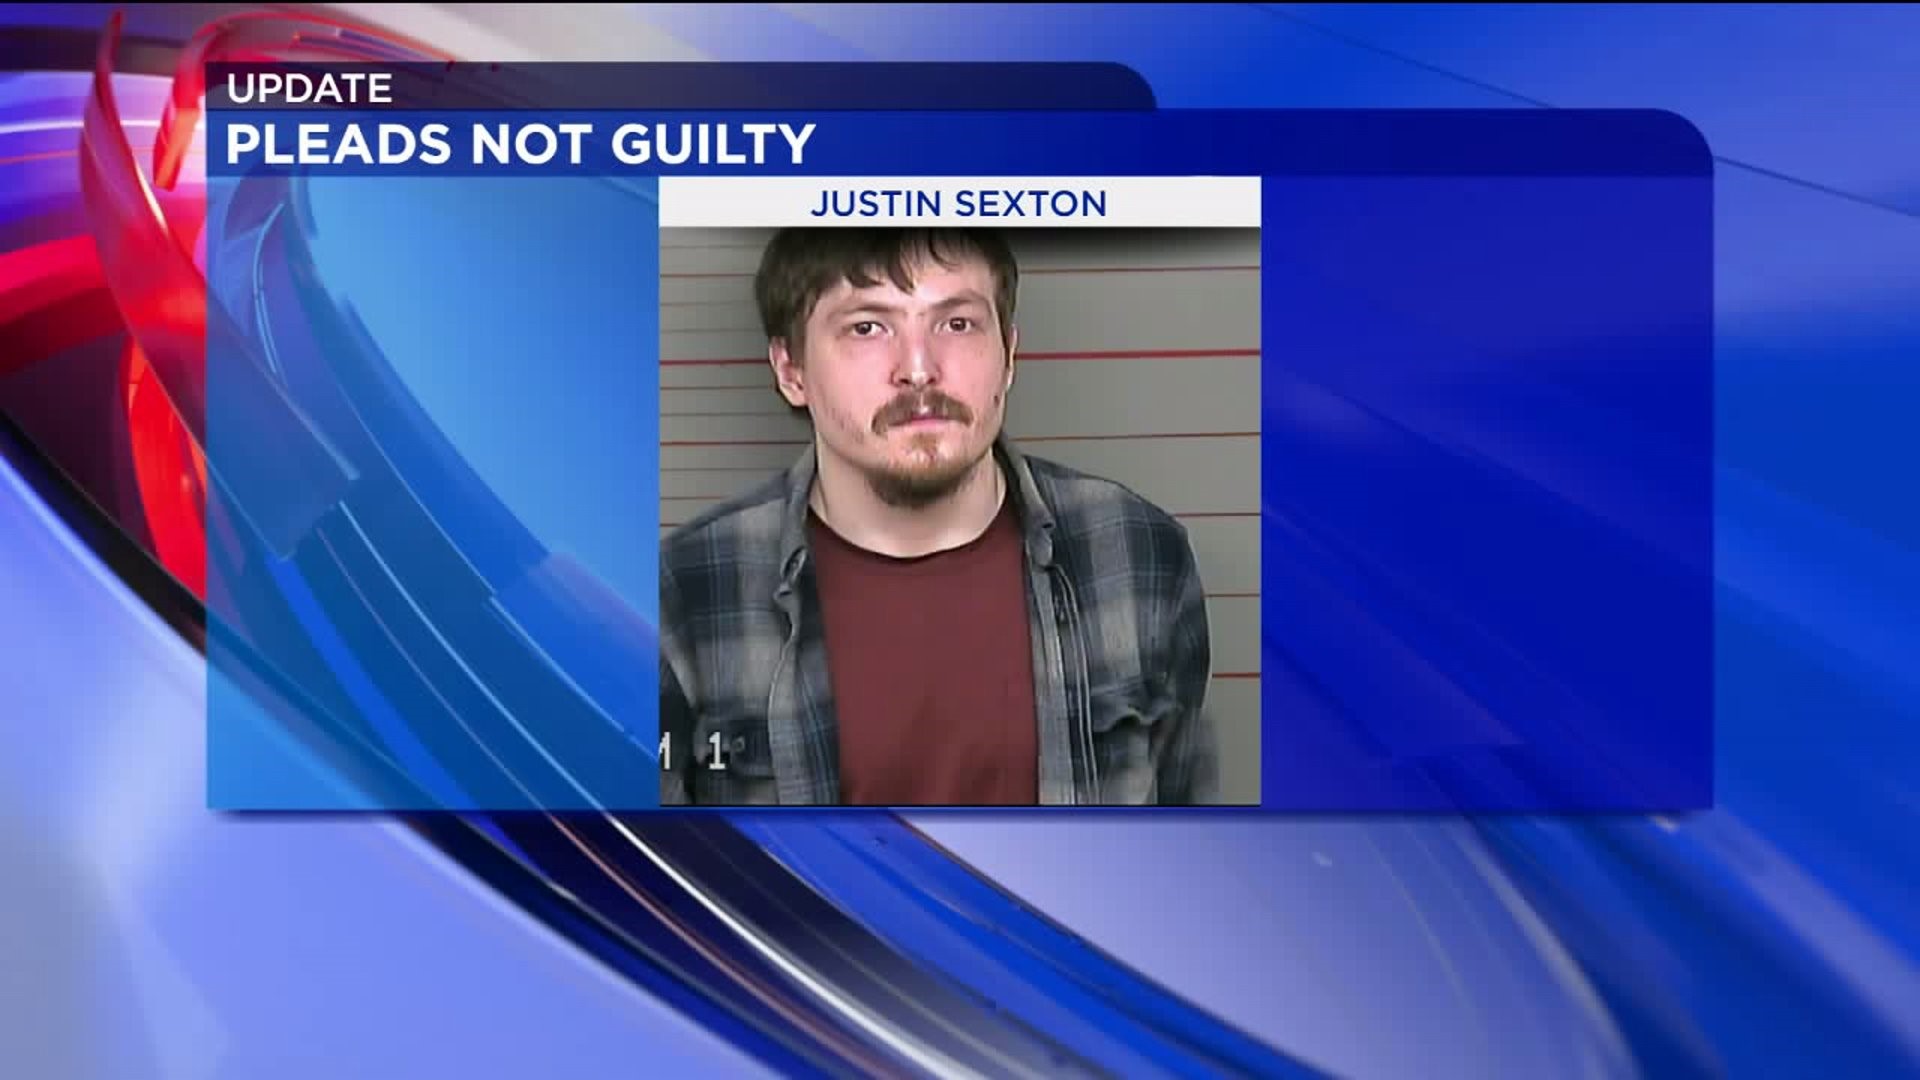 Sexton Pleads Not Guilty to Charges of Attempted Murder